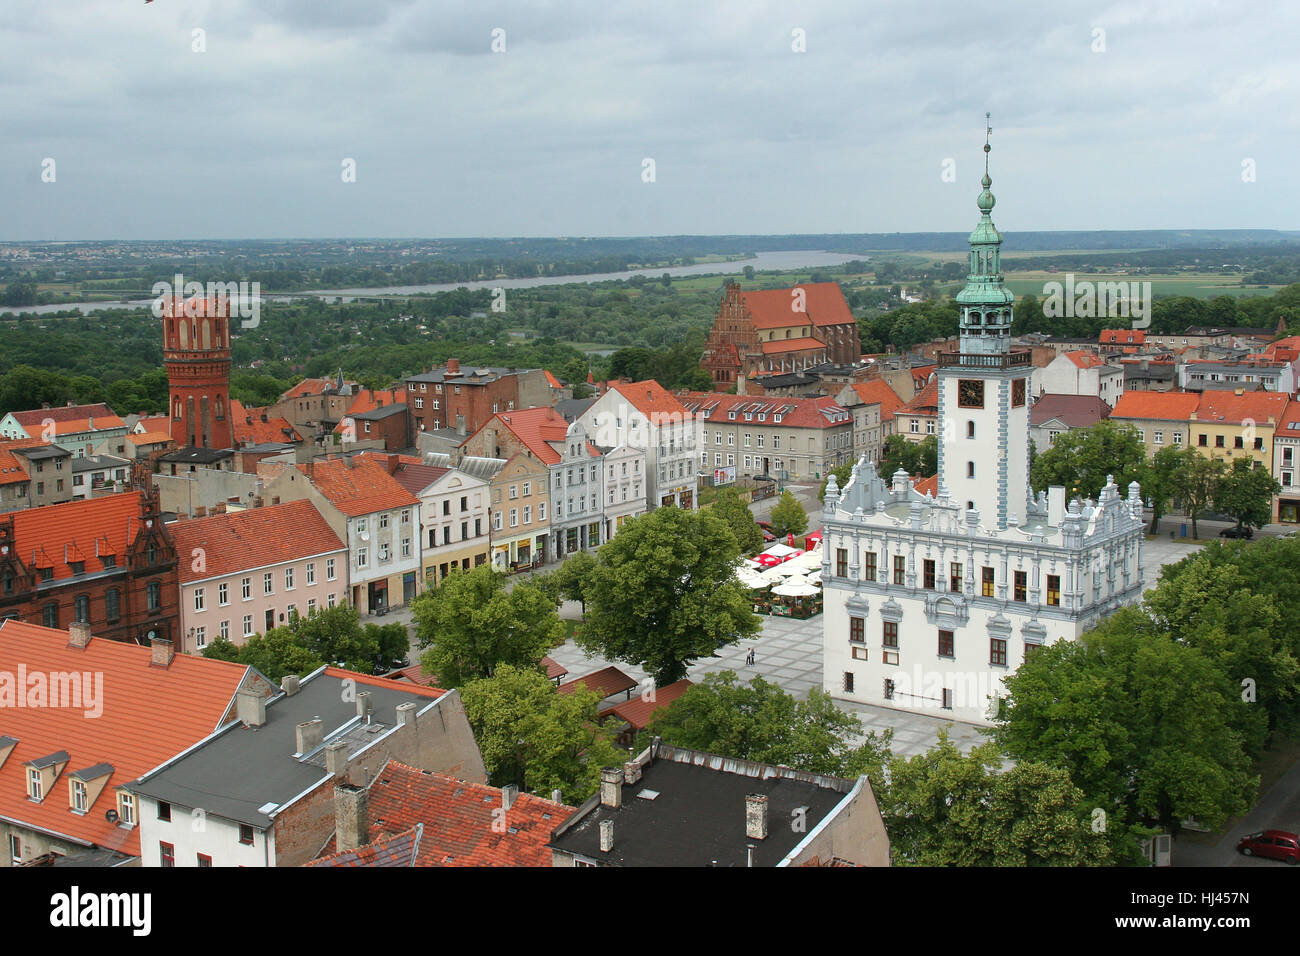 Aerial view on the main square in Chelmno, Poland with the renaissance town hall in the centre Stock Photo